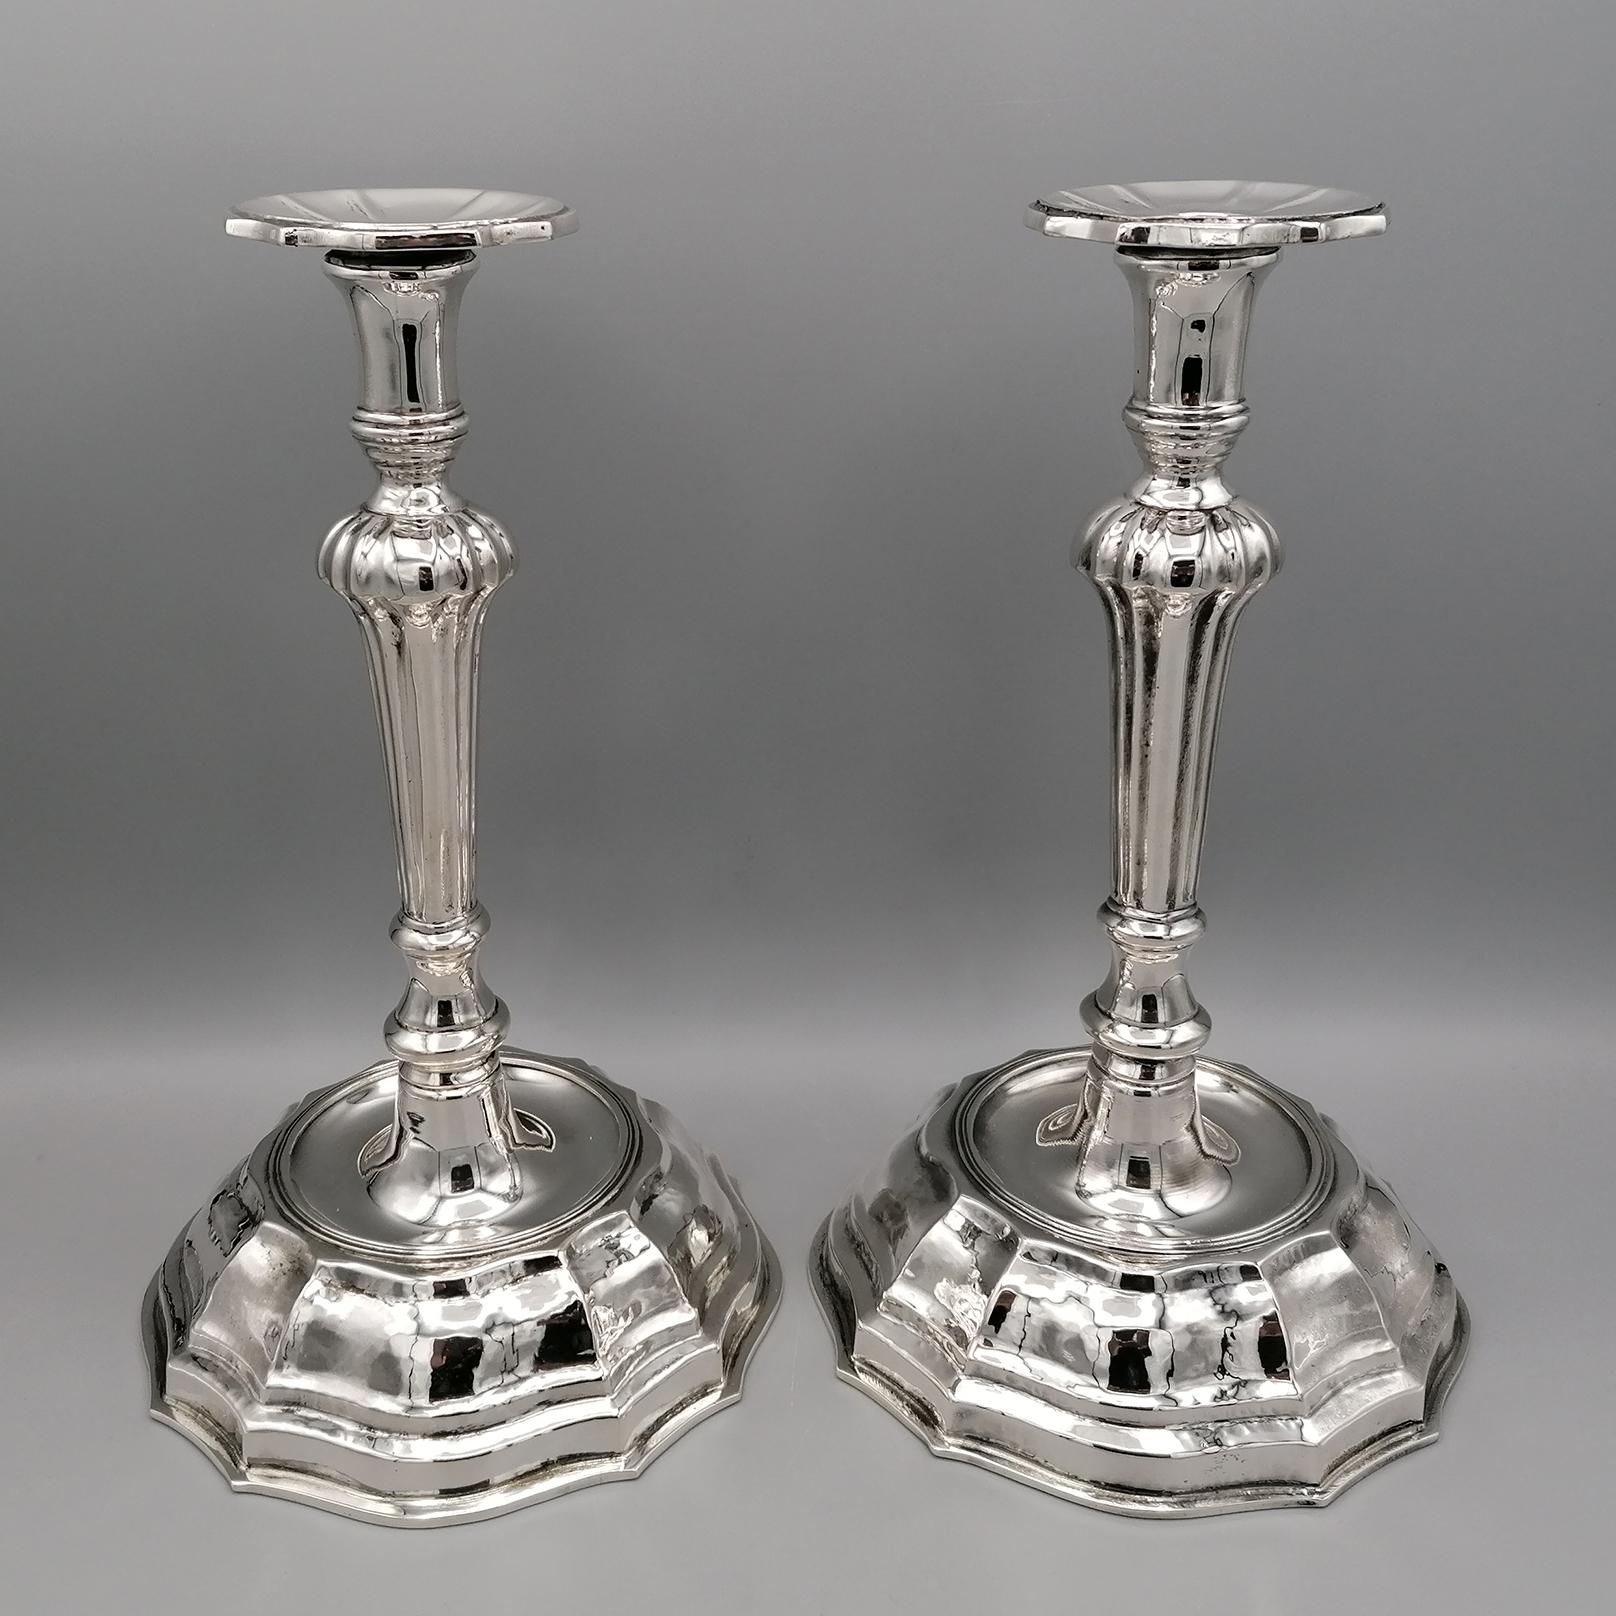 Pair of classic hand-made candlesticks in Baroque style '700.
The base is round and is made of hammered plate.
The stem is cast, grooved and chiseled finishing with the shaped wax collector. 
By Zanovello Argenteria - Padua - Italy
For Arval Argenti